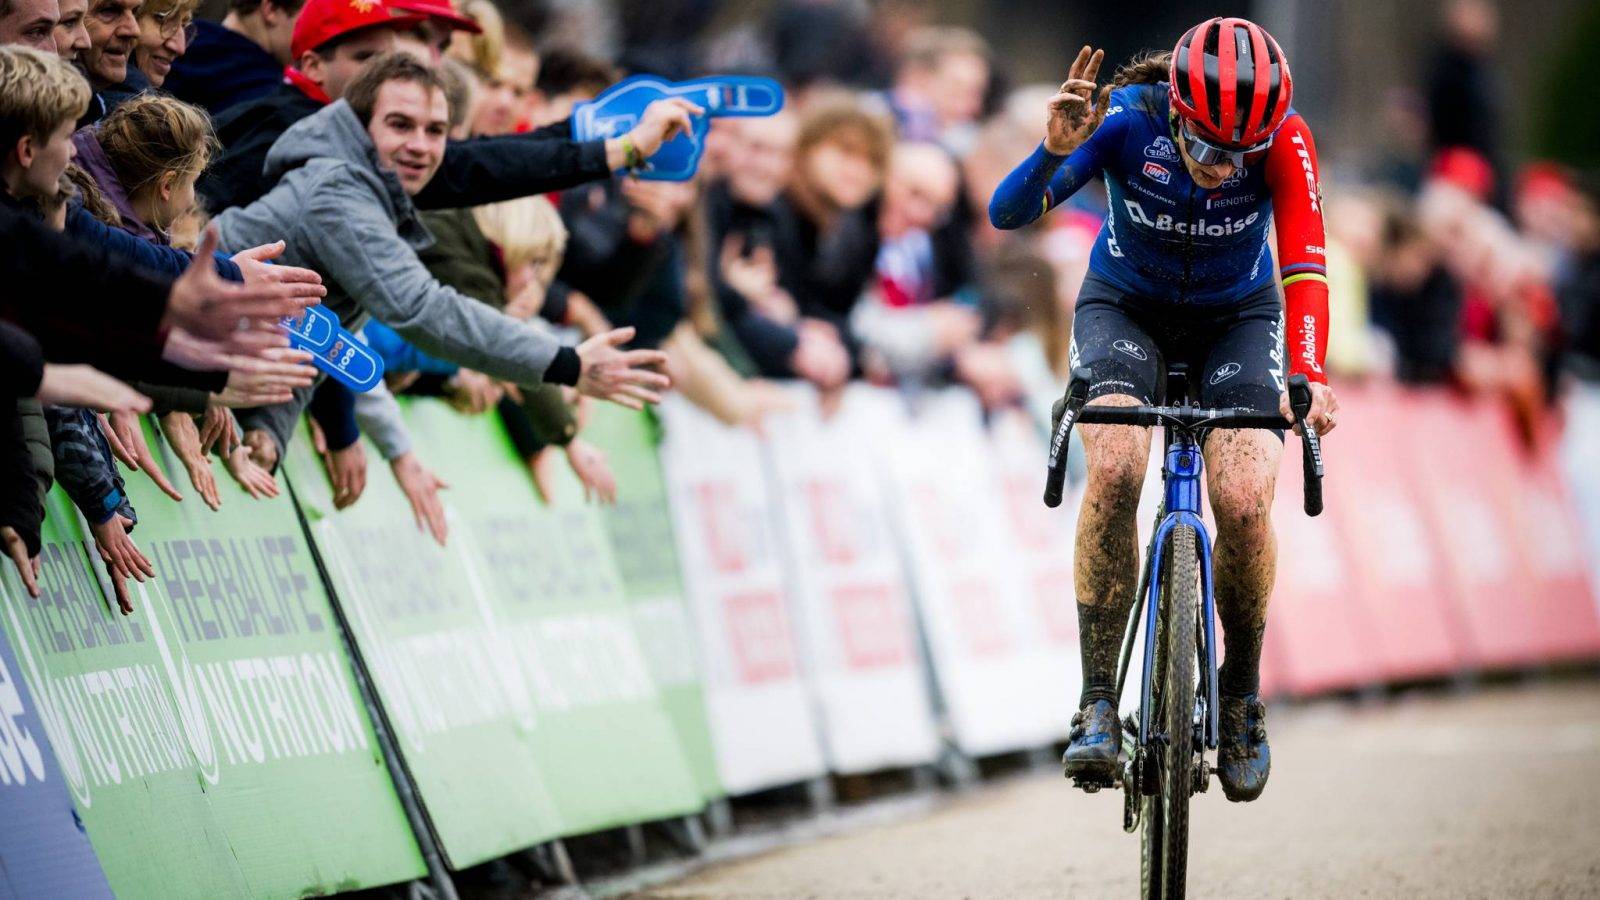 Dutch Lucinda Brand pictured in action during the women's elite race of the 'GP Sven Nys' cyclocross cycling event on Sunday 01 January 2023 in Baal, the third stage in the X2O Badkamers 'Trofee Veldrijden' competition. BELGA PHOTO JASPER JACOBS